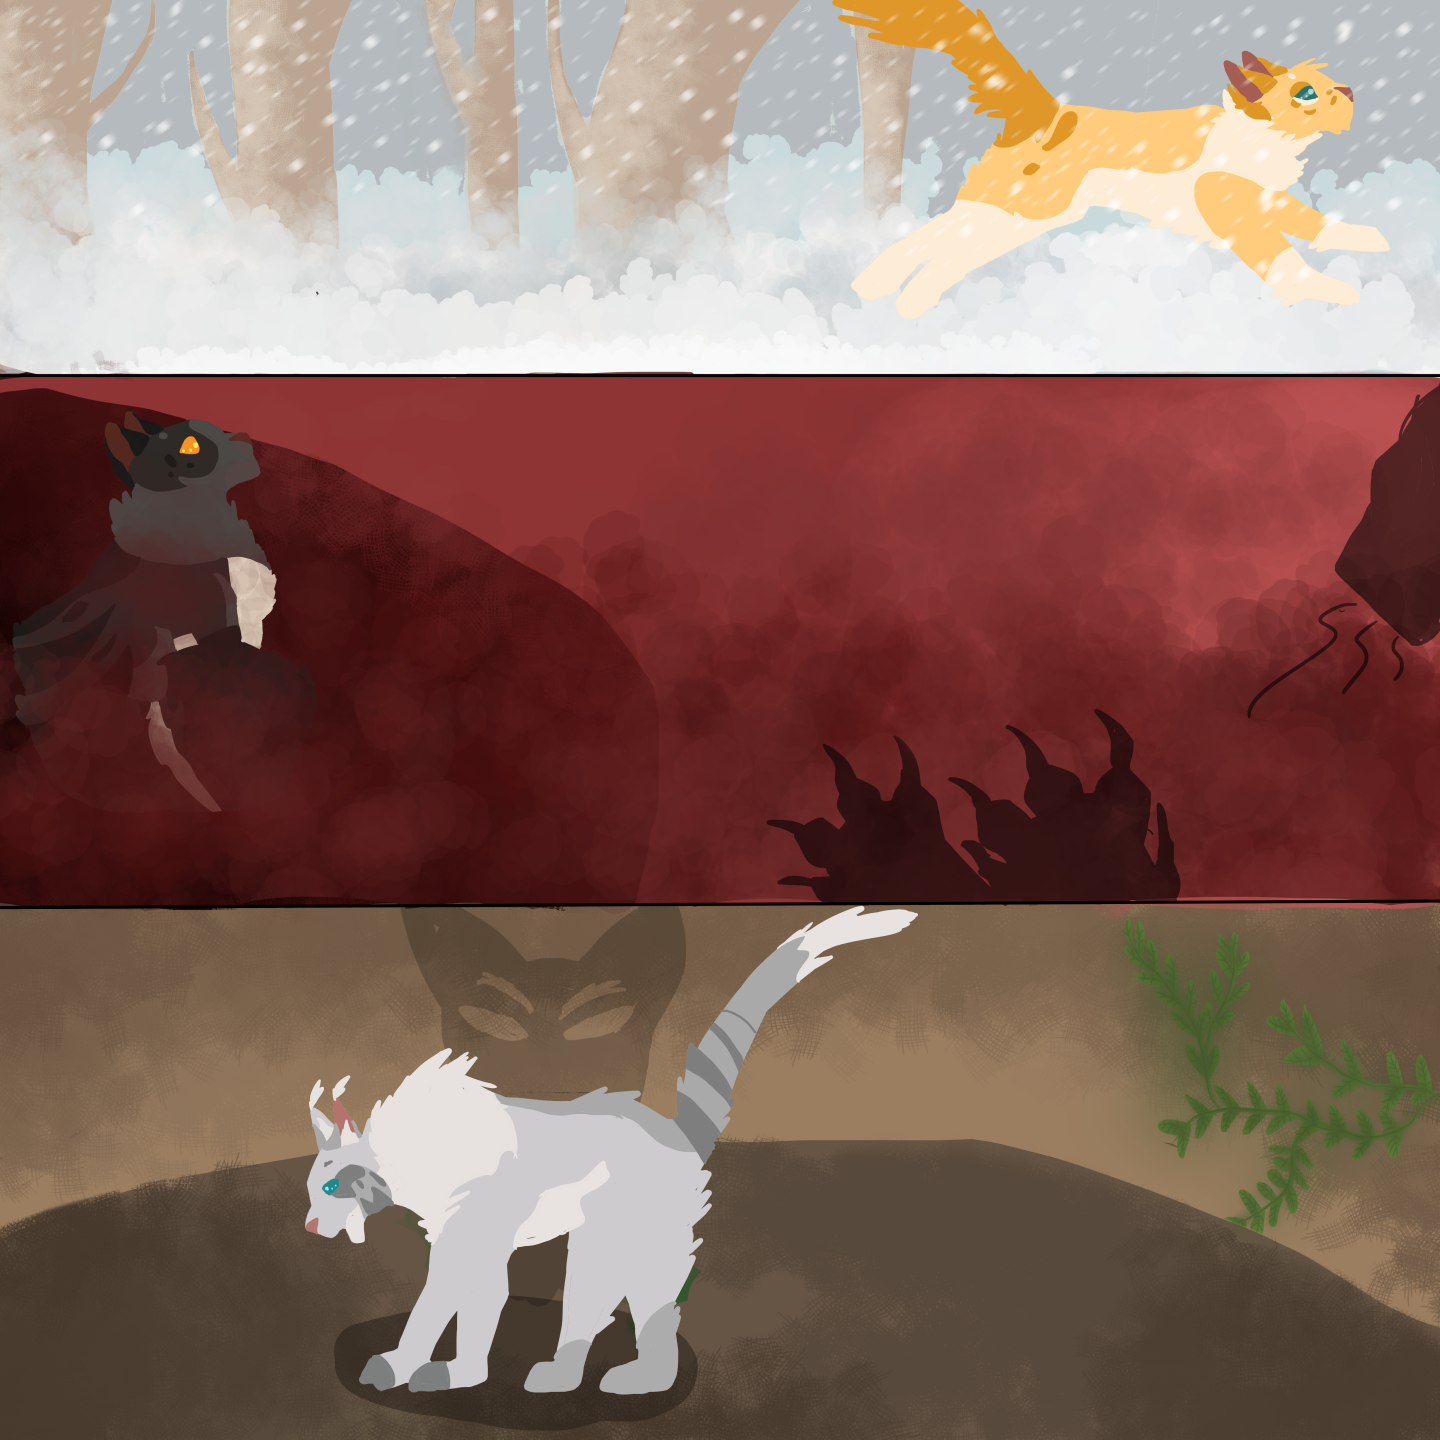 Warrior cats in among us (broken code reference) by TheWOFAndWCGuy on  DeviantArt